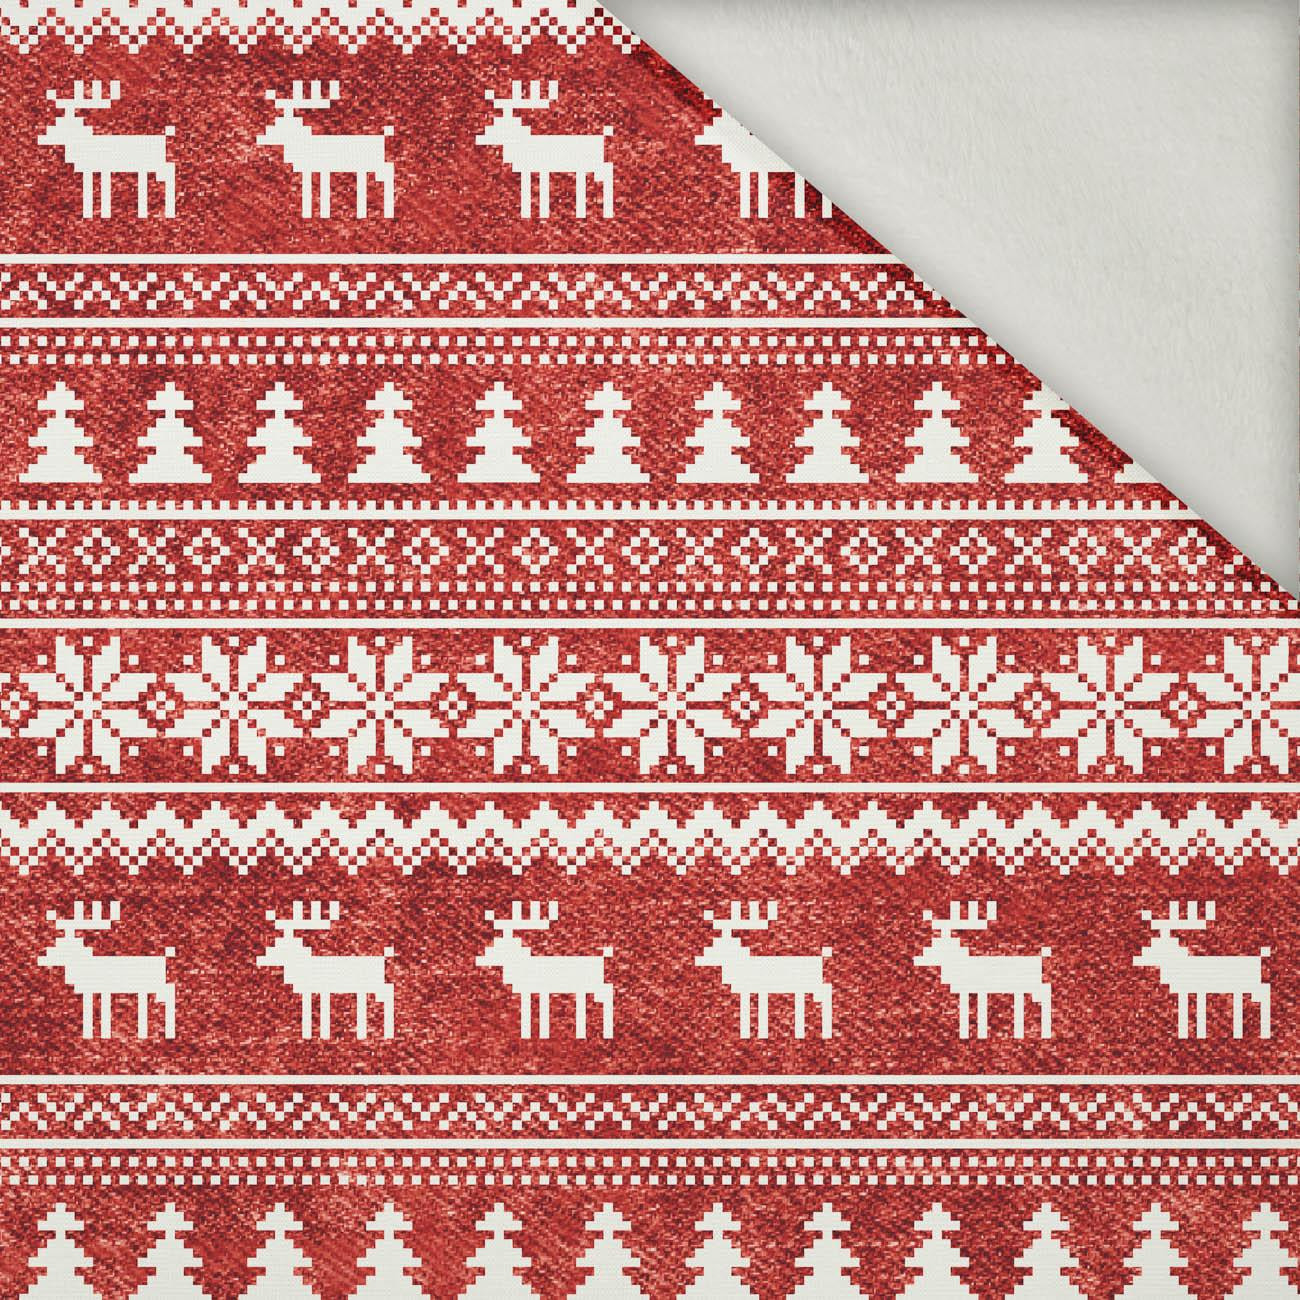 REINDEERS PAT. 2 / ACID WASH RED - brushed knit fabric with teddy / alpine fleece